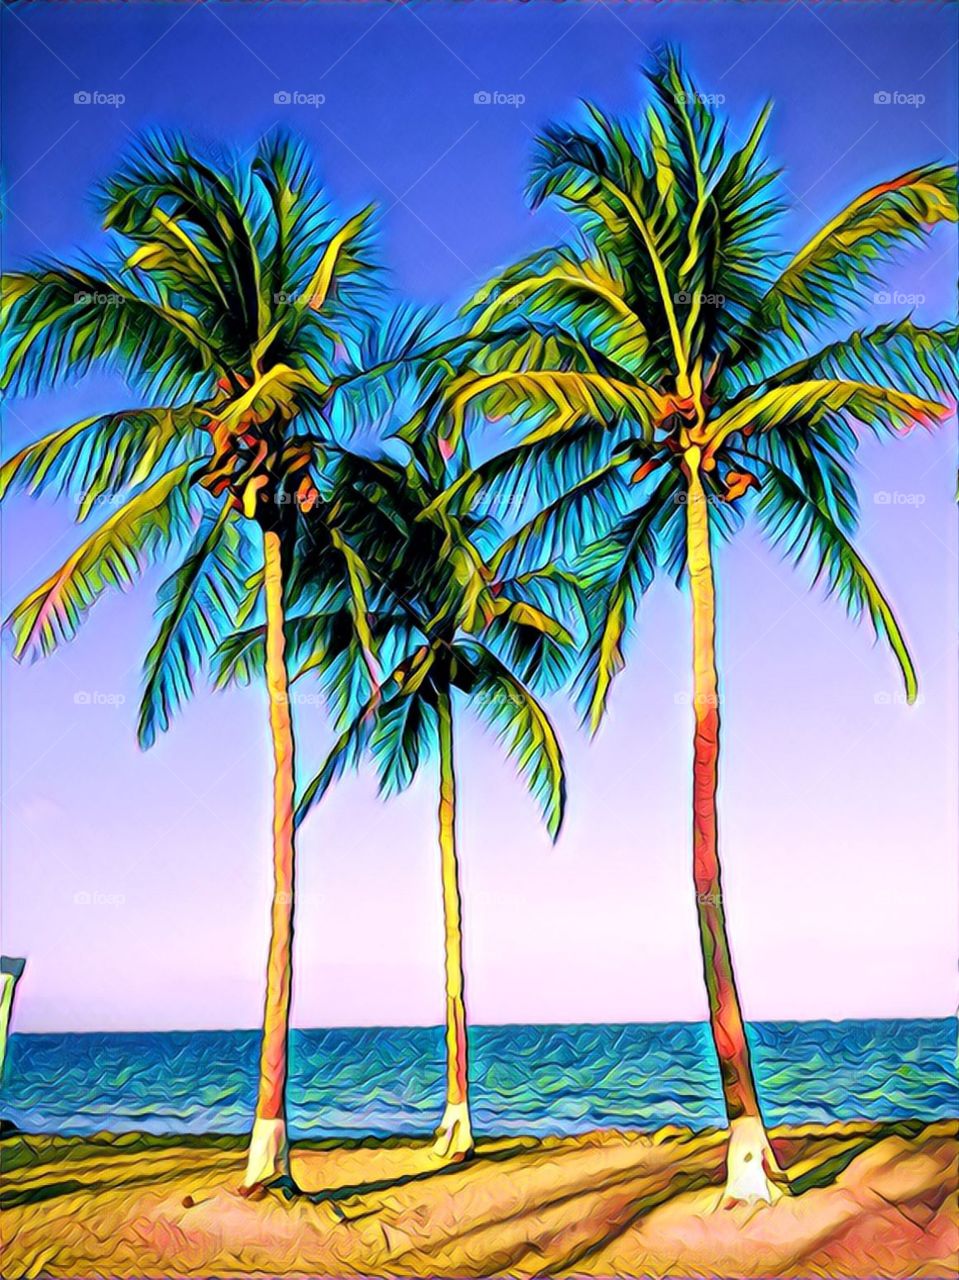 Three Palm trees by the ocean